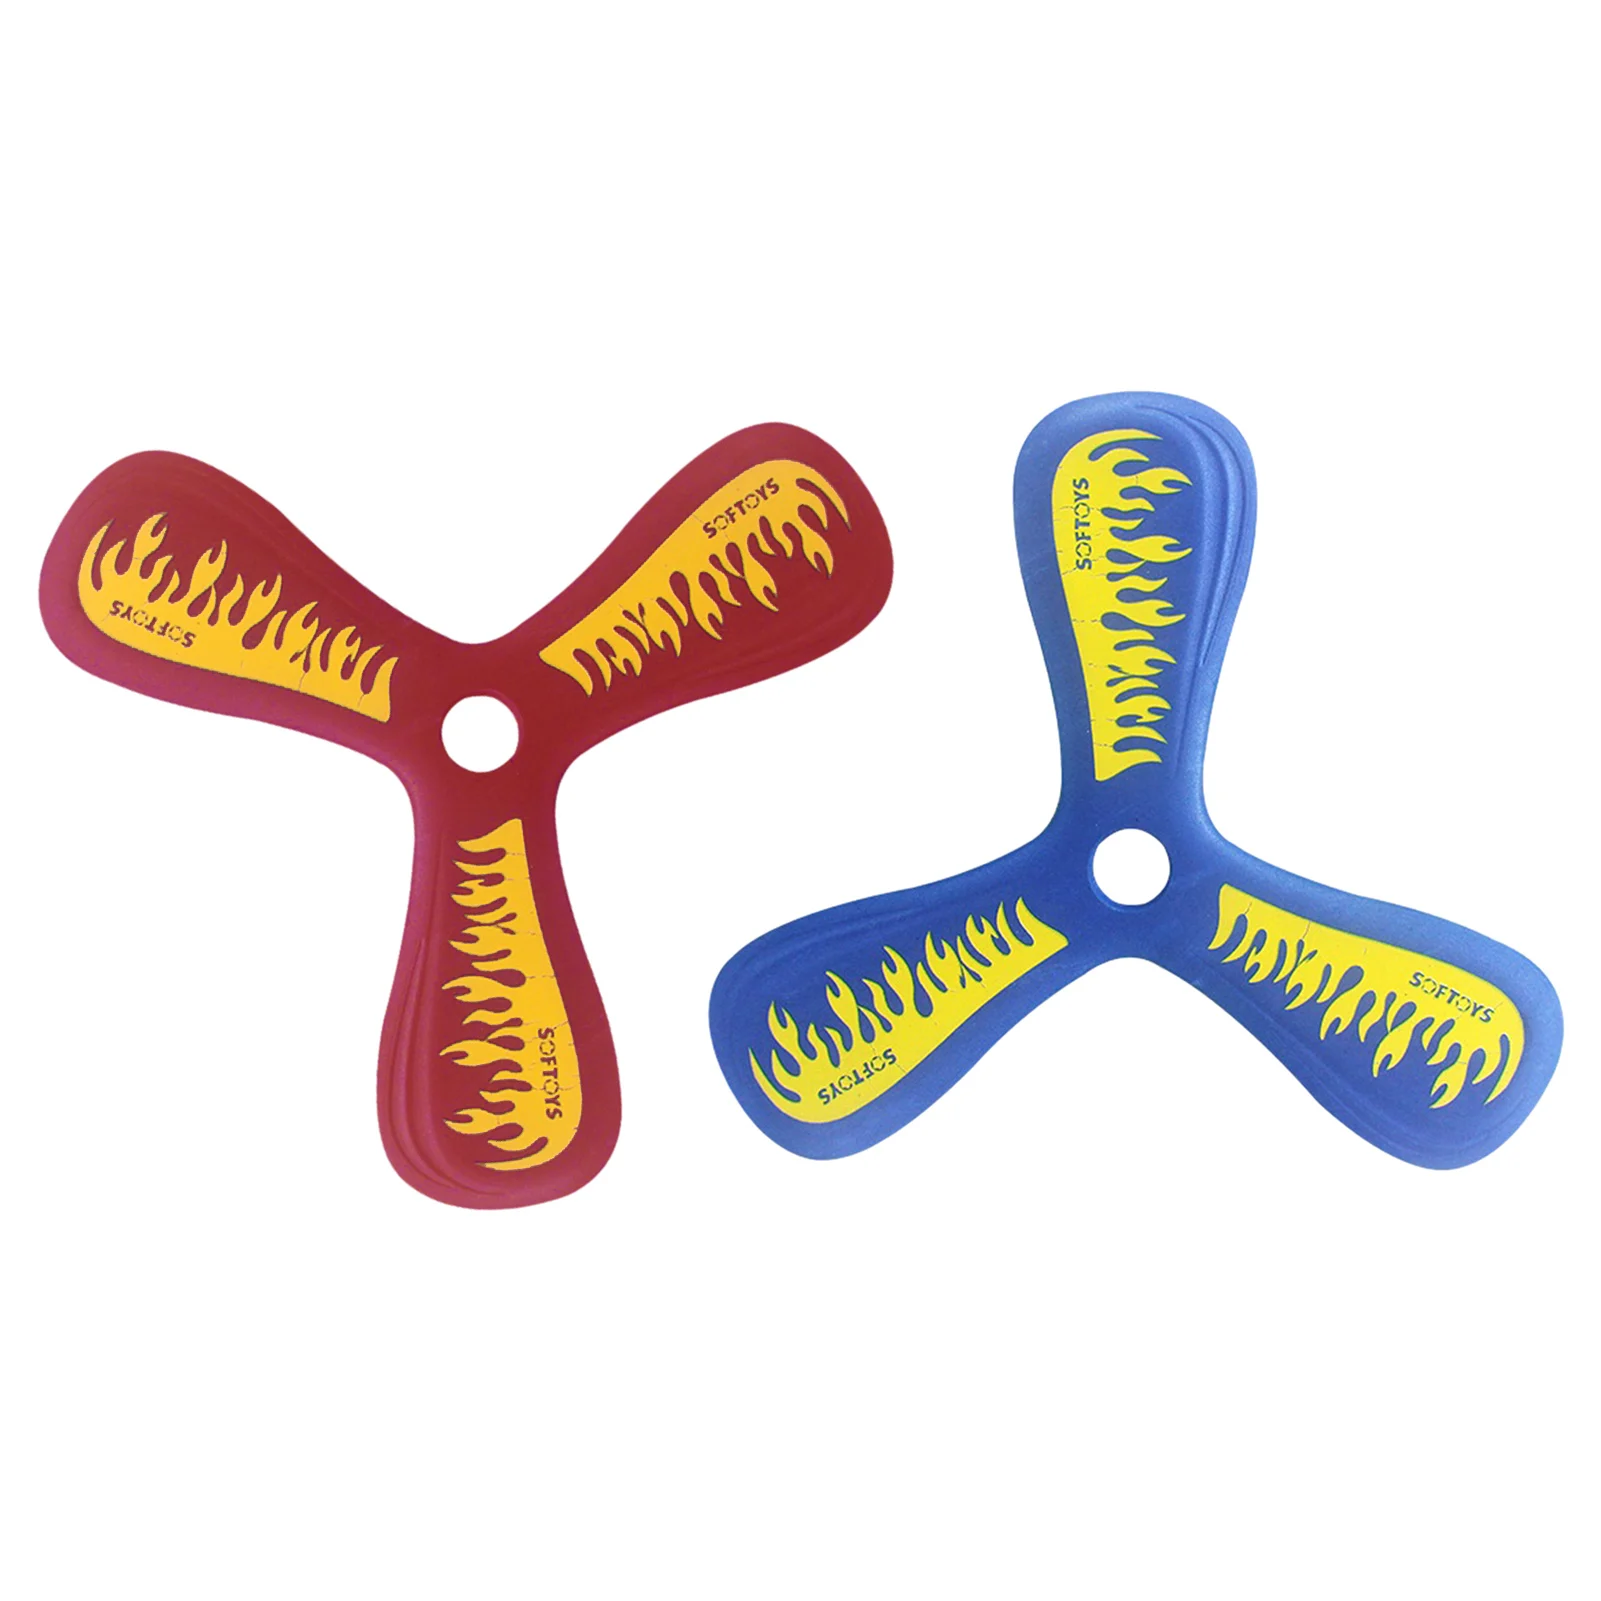 

Profesional Boomerang Children's Puzzle Decompression Toy Safe Durable Outdoor Yard Games Toys Sports Sports Fun Game